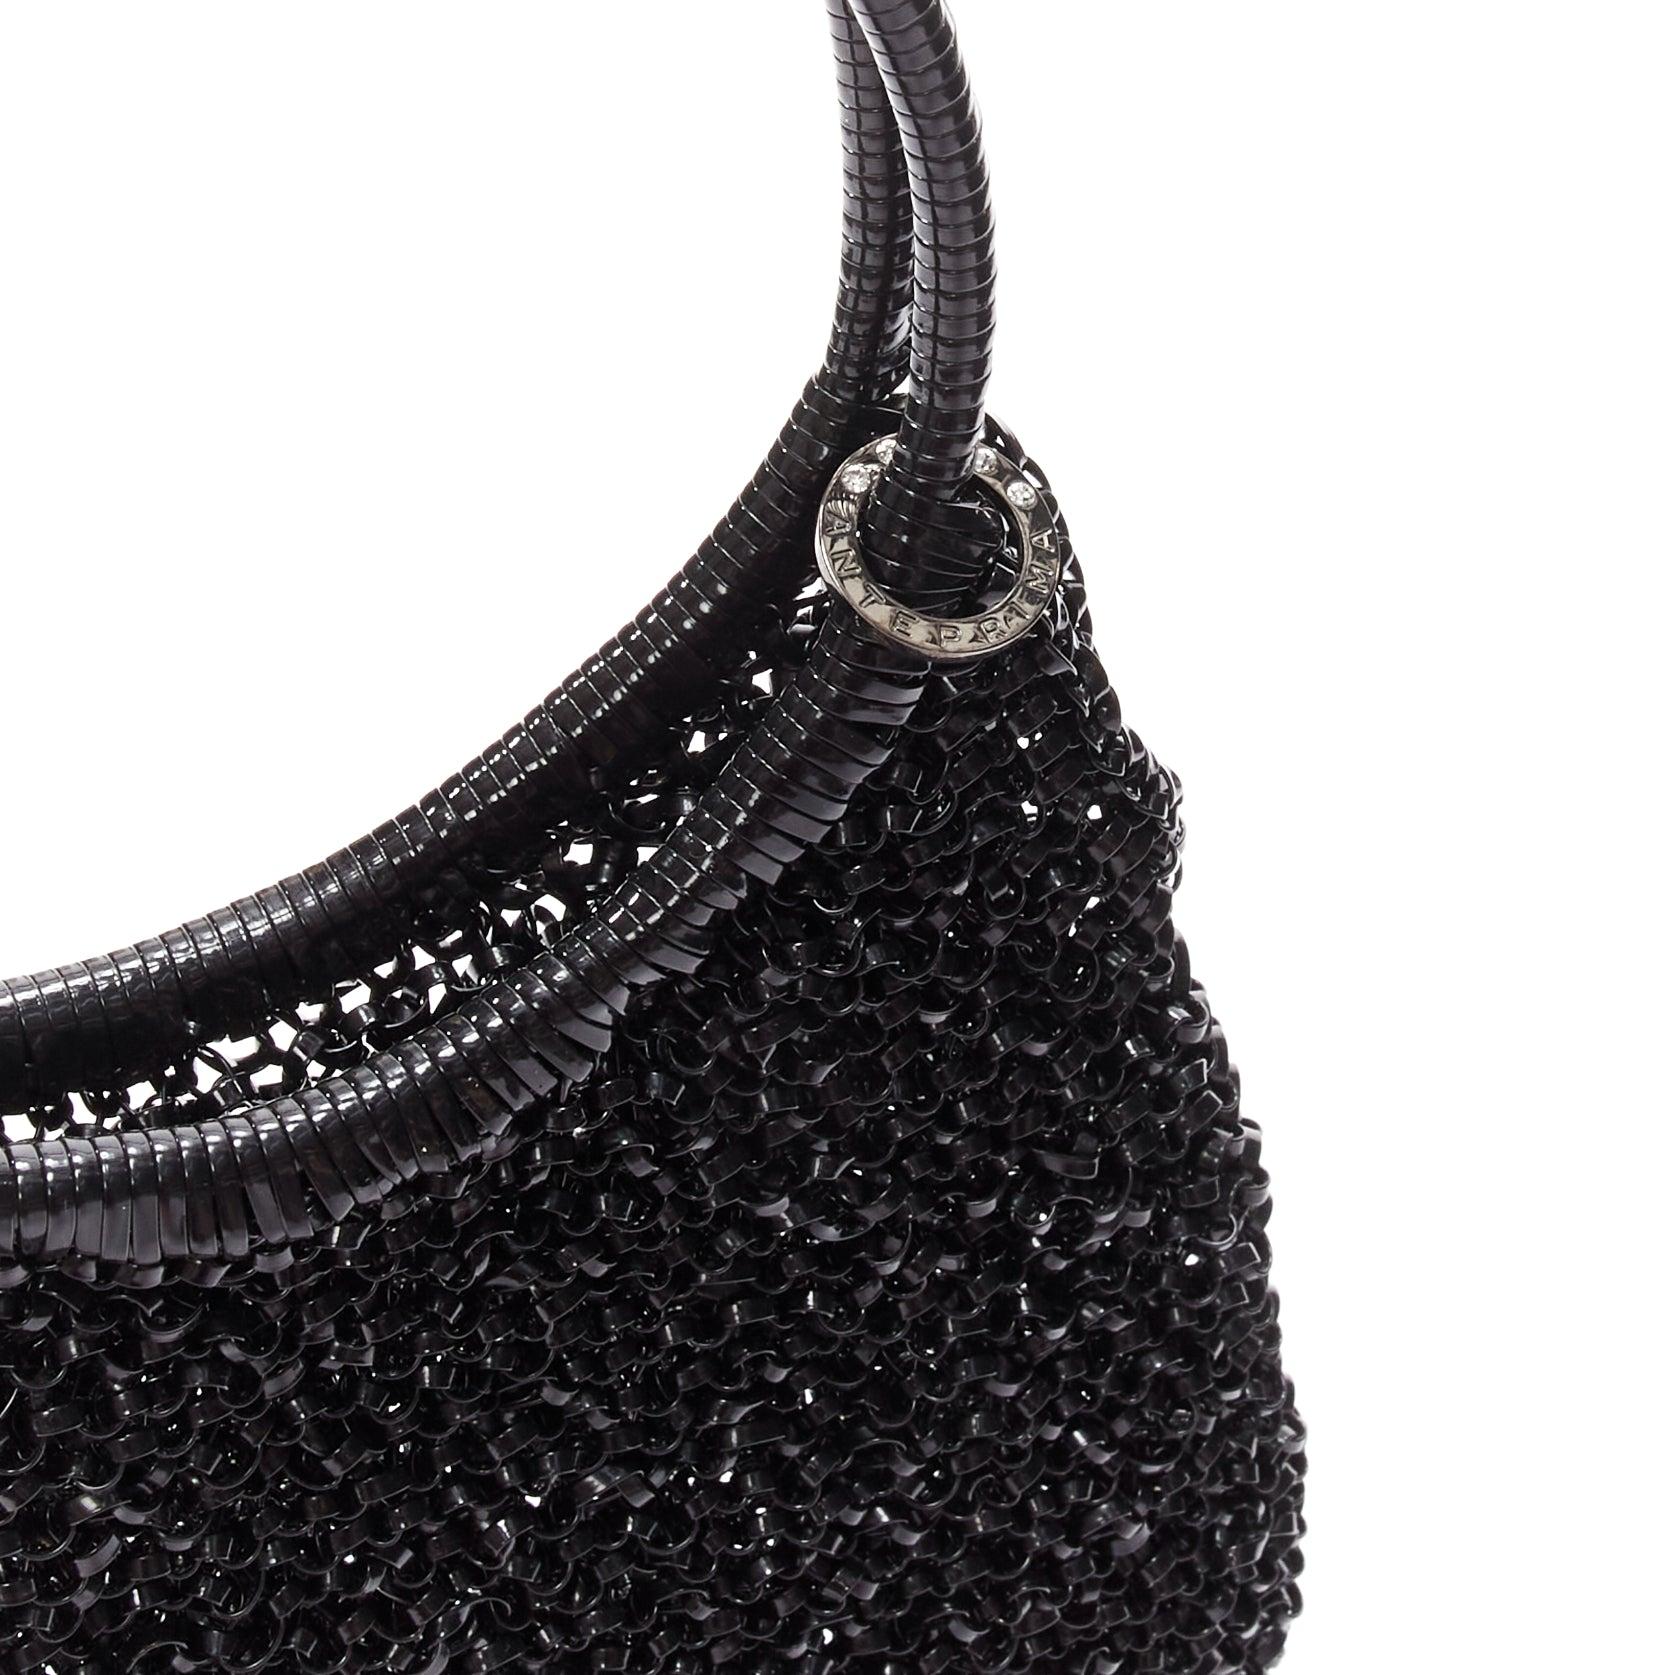 ANTEPRIMA HELLO KITTY Wire Bag black crystal leather sequin teardrop tote For Sale 3